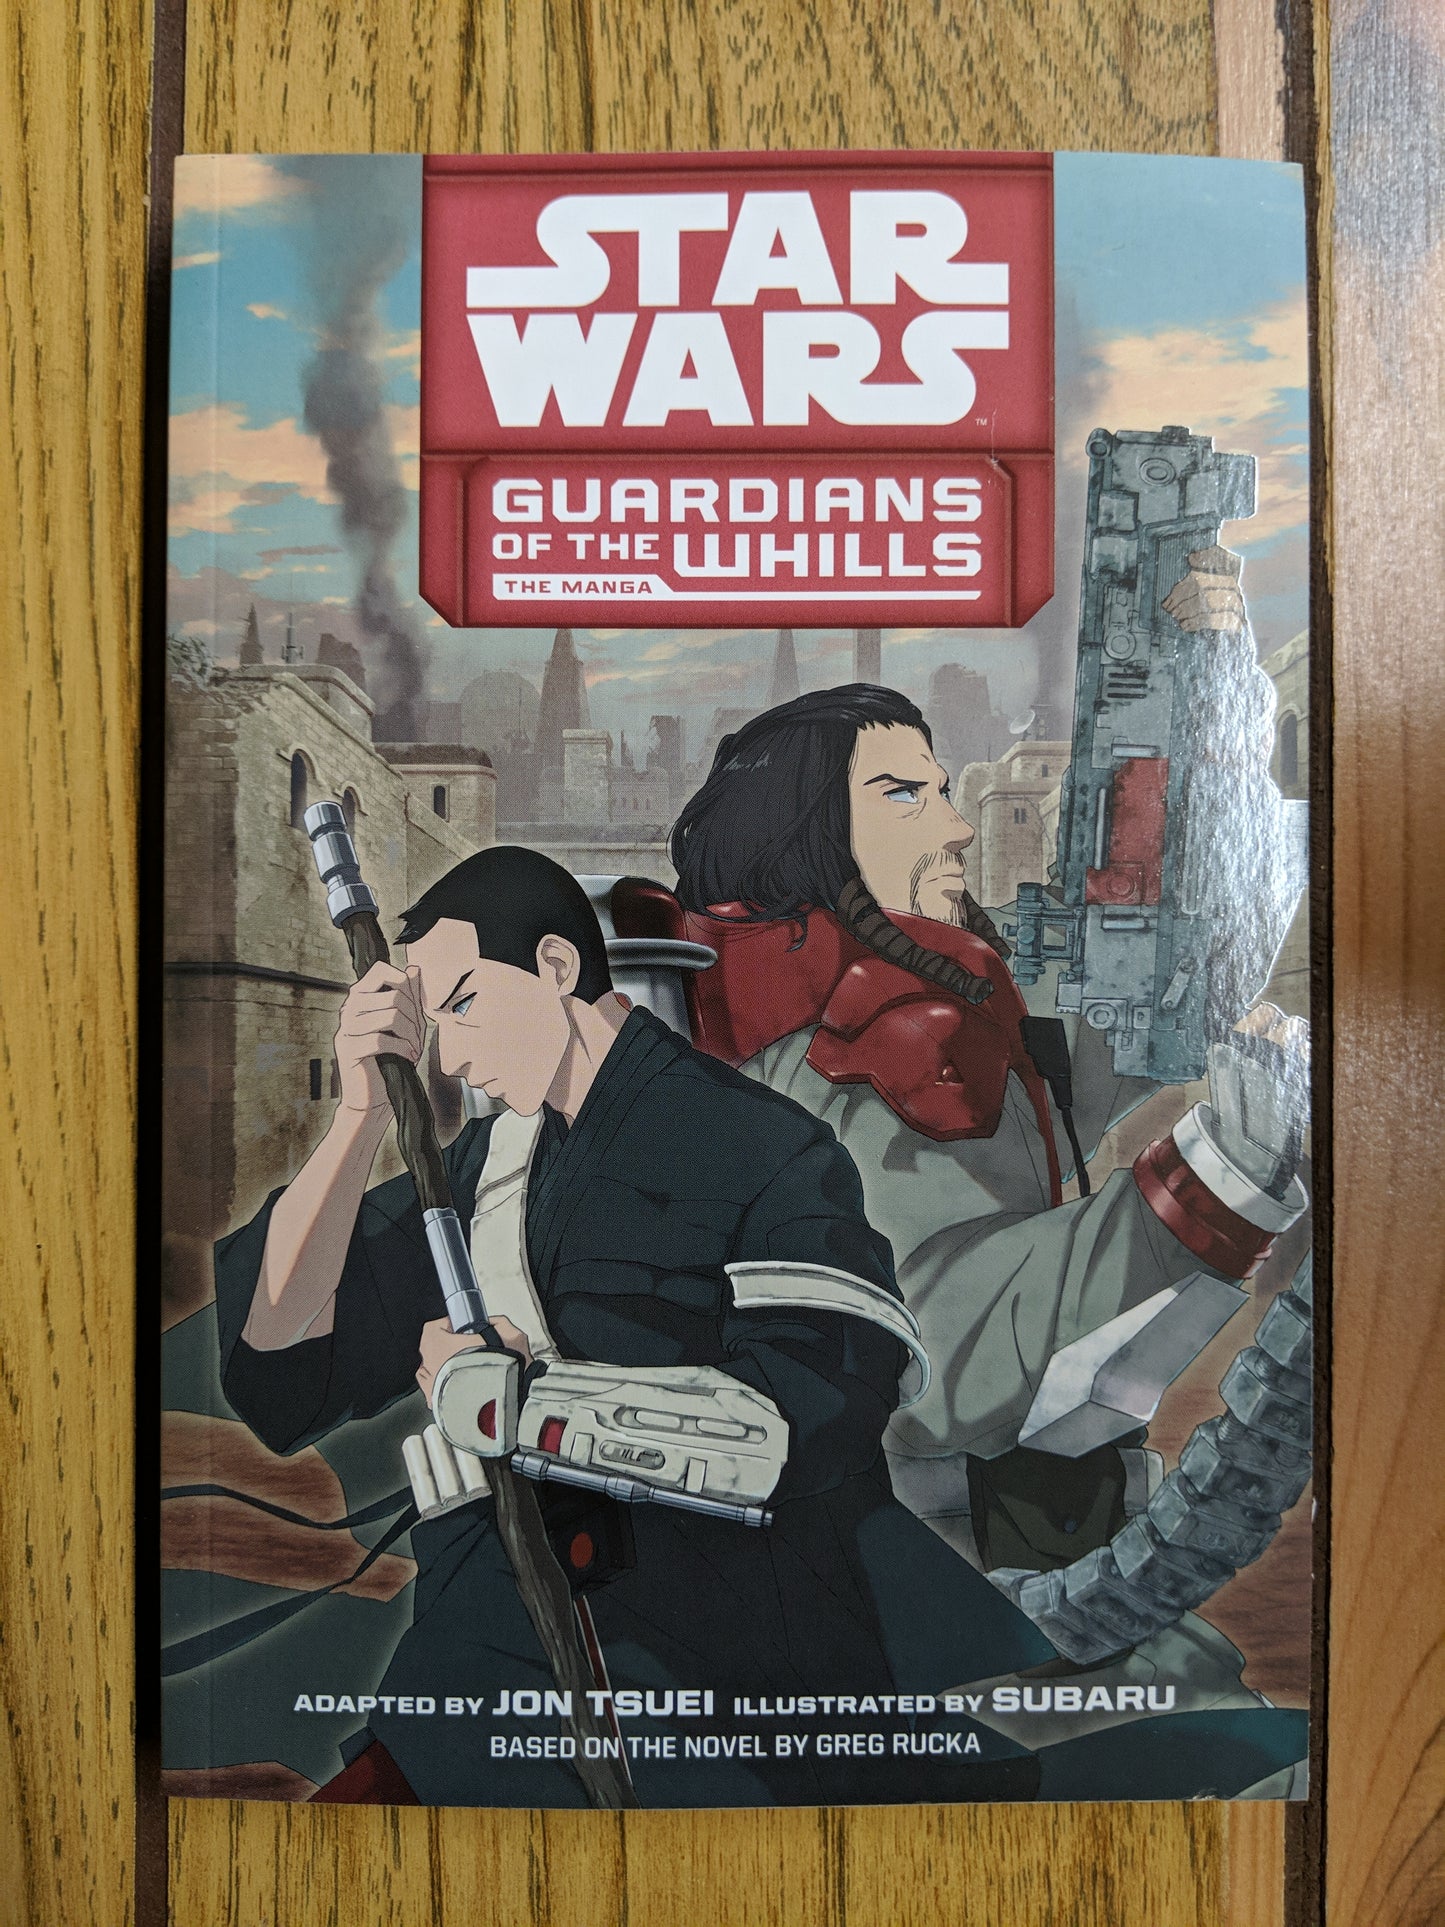 Star Wars: Guardians of the Whills: The Manga